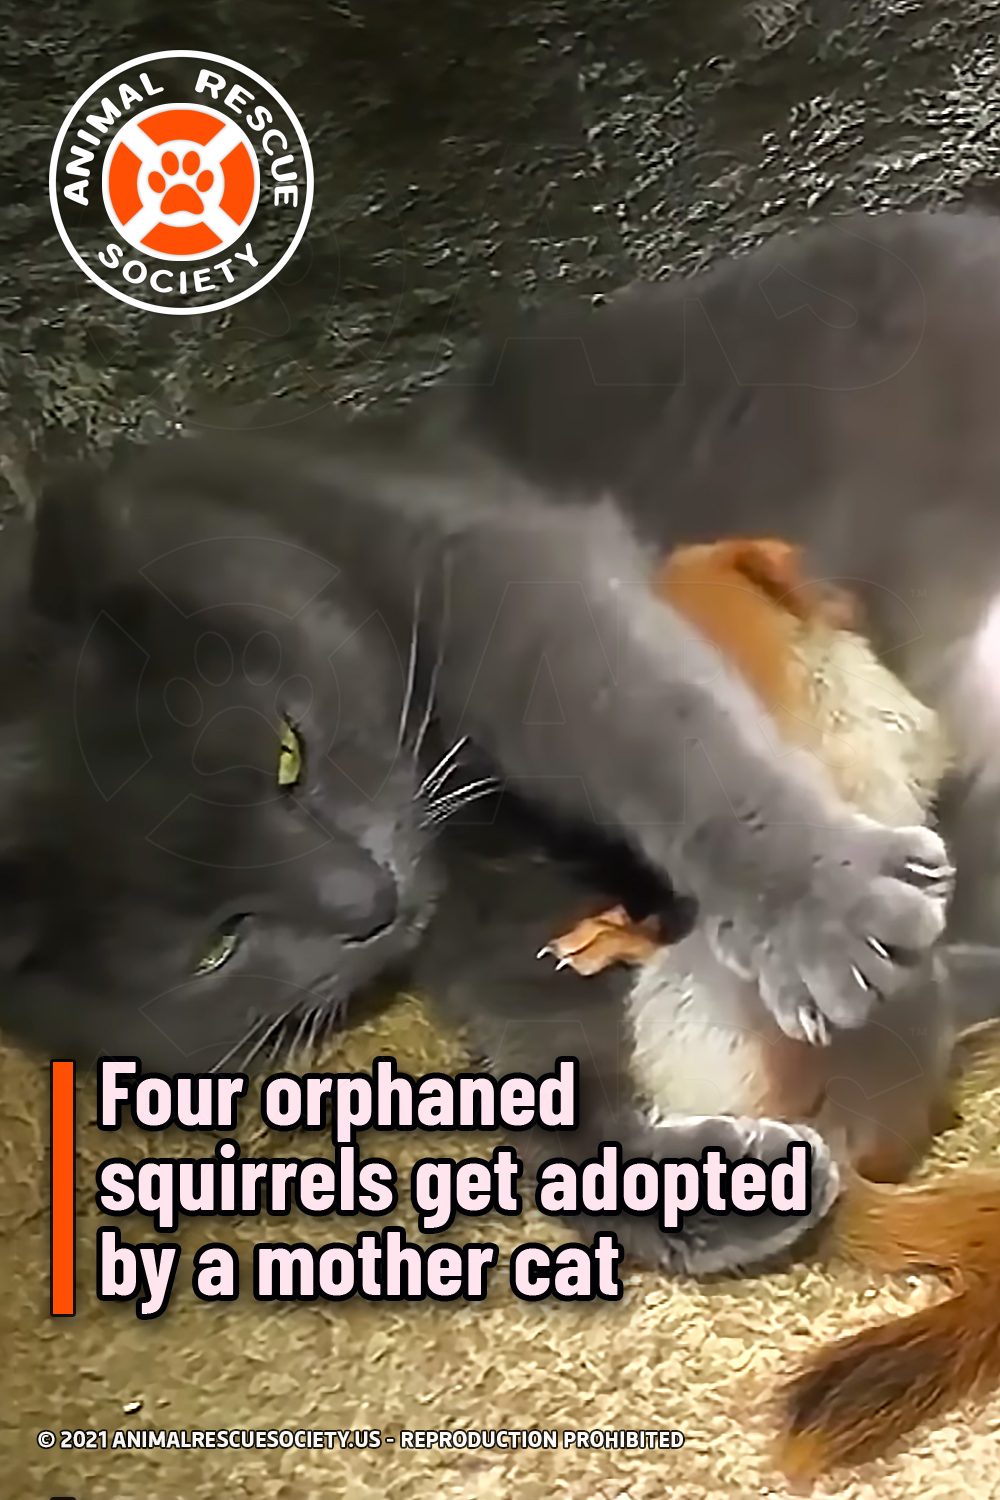 Four orphaned squirrels get adopted by a mother cat